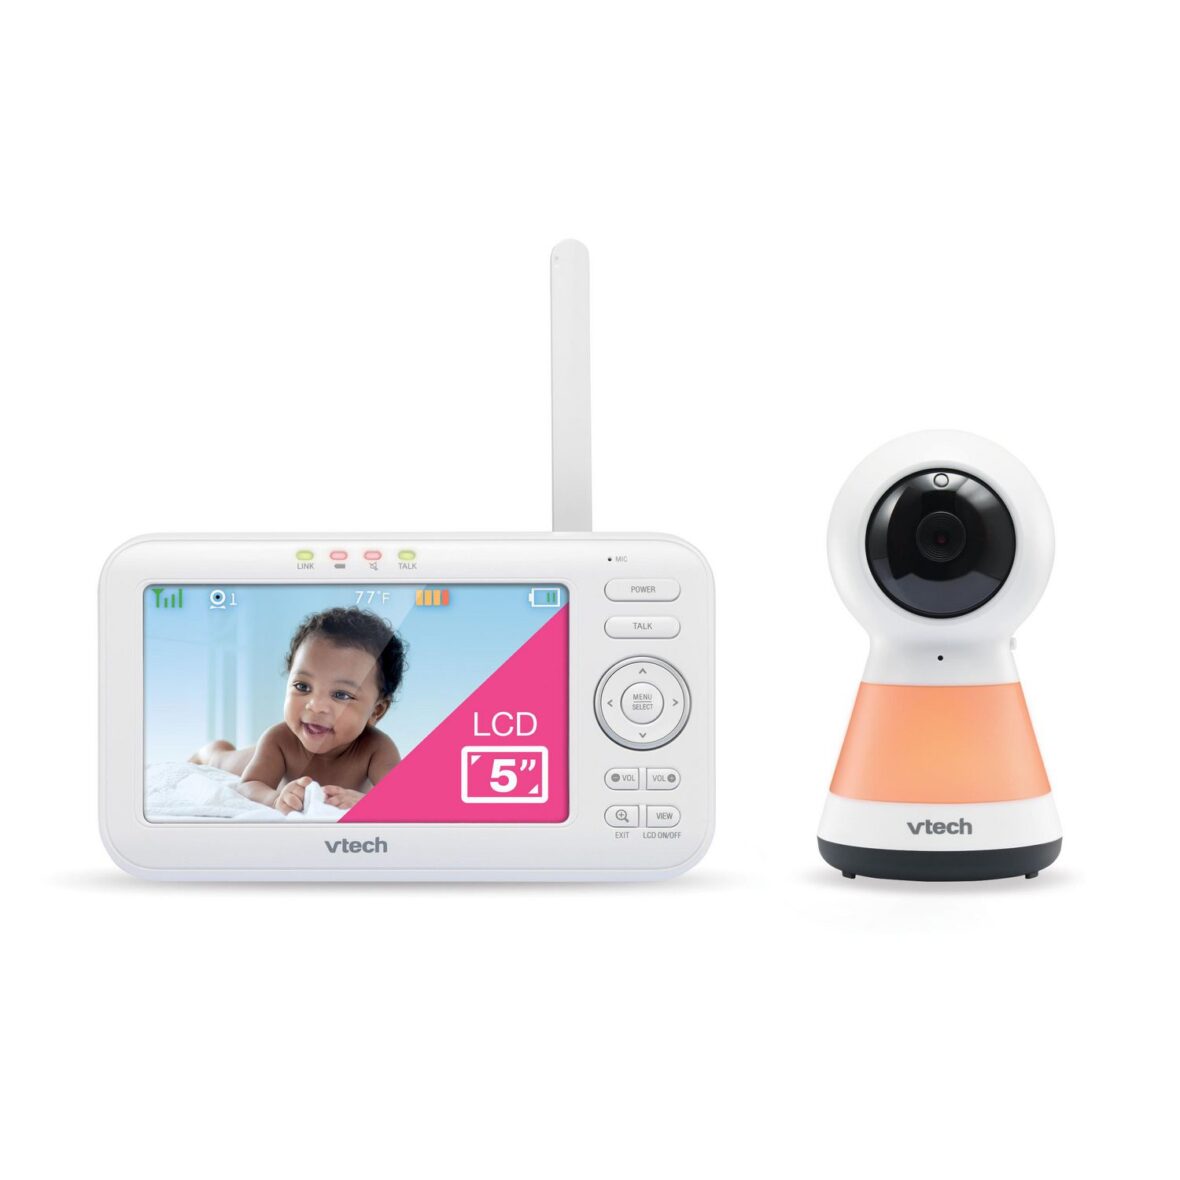 VTech VM5255-2 2 Camera 5” Digital Video Baby Monitor with Pan Scan and Night Light